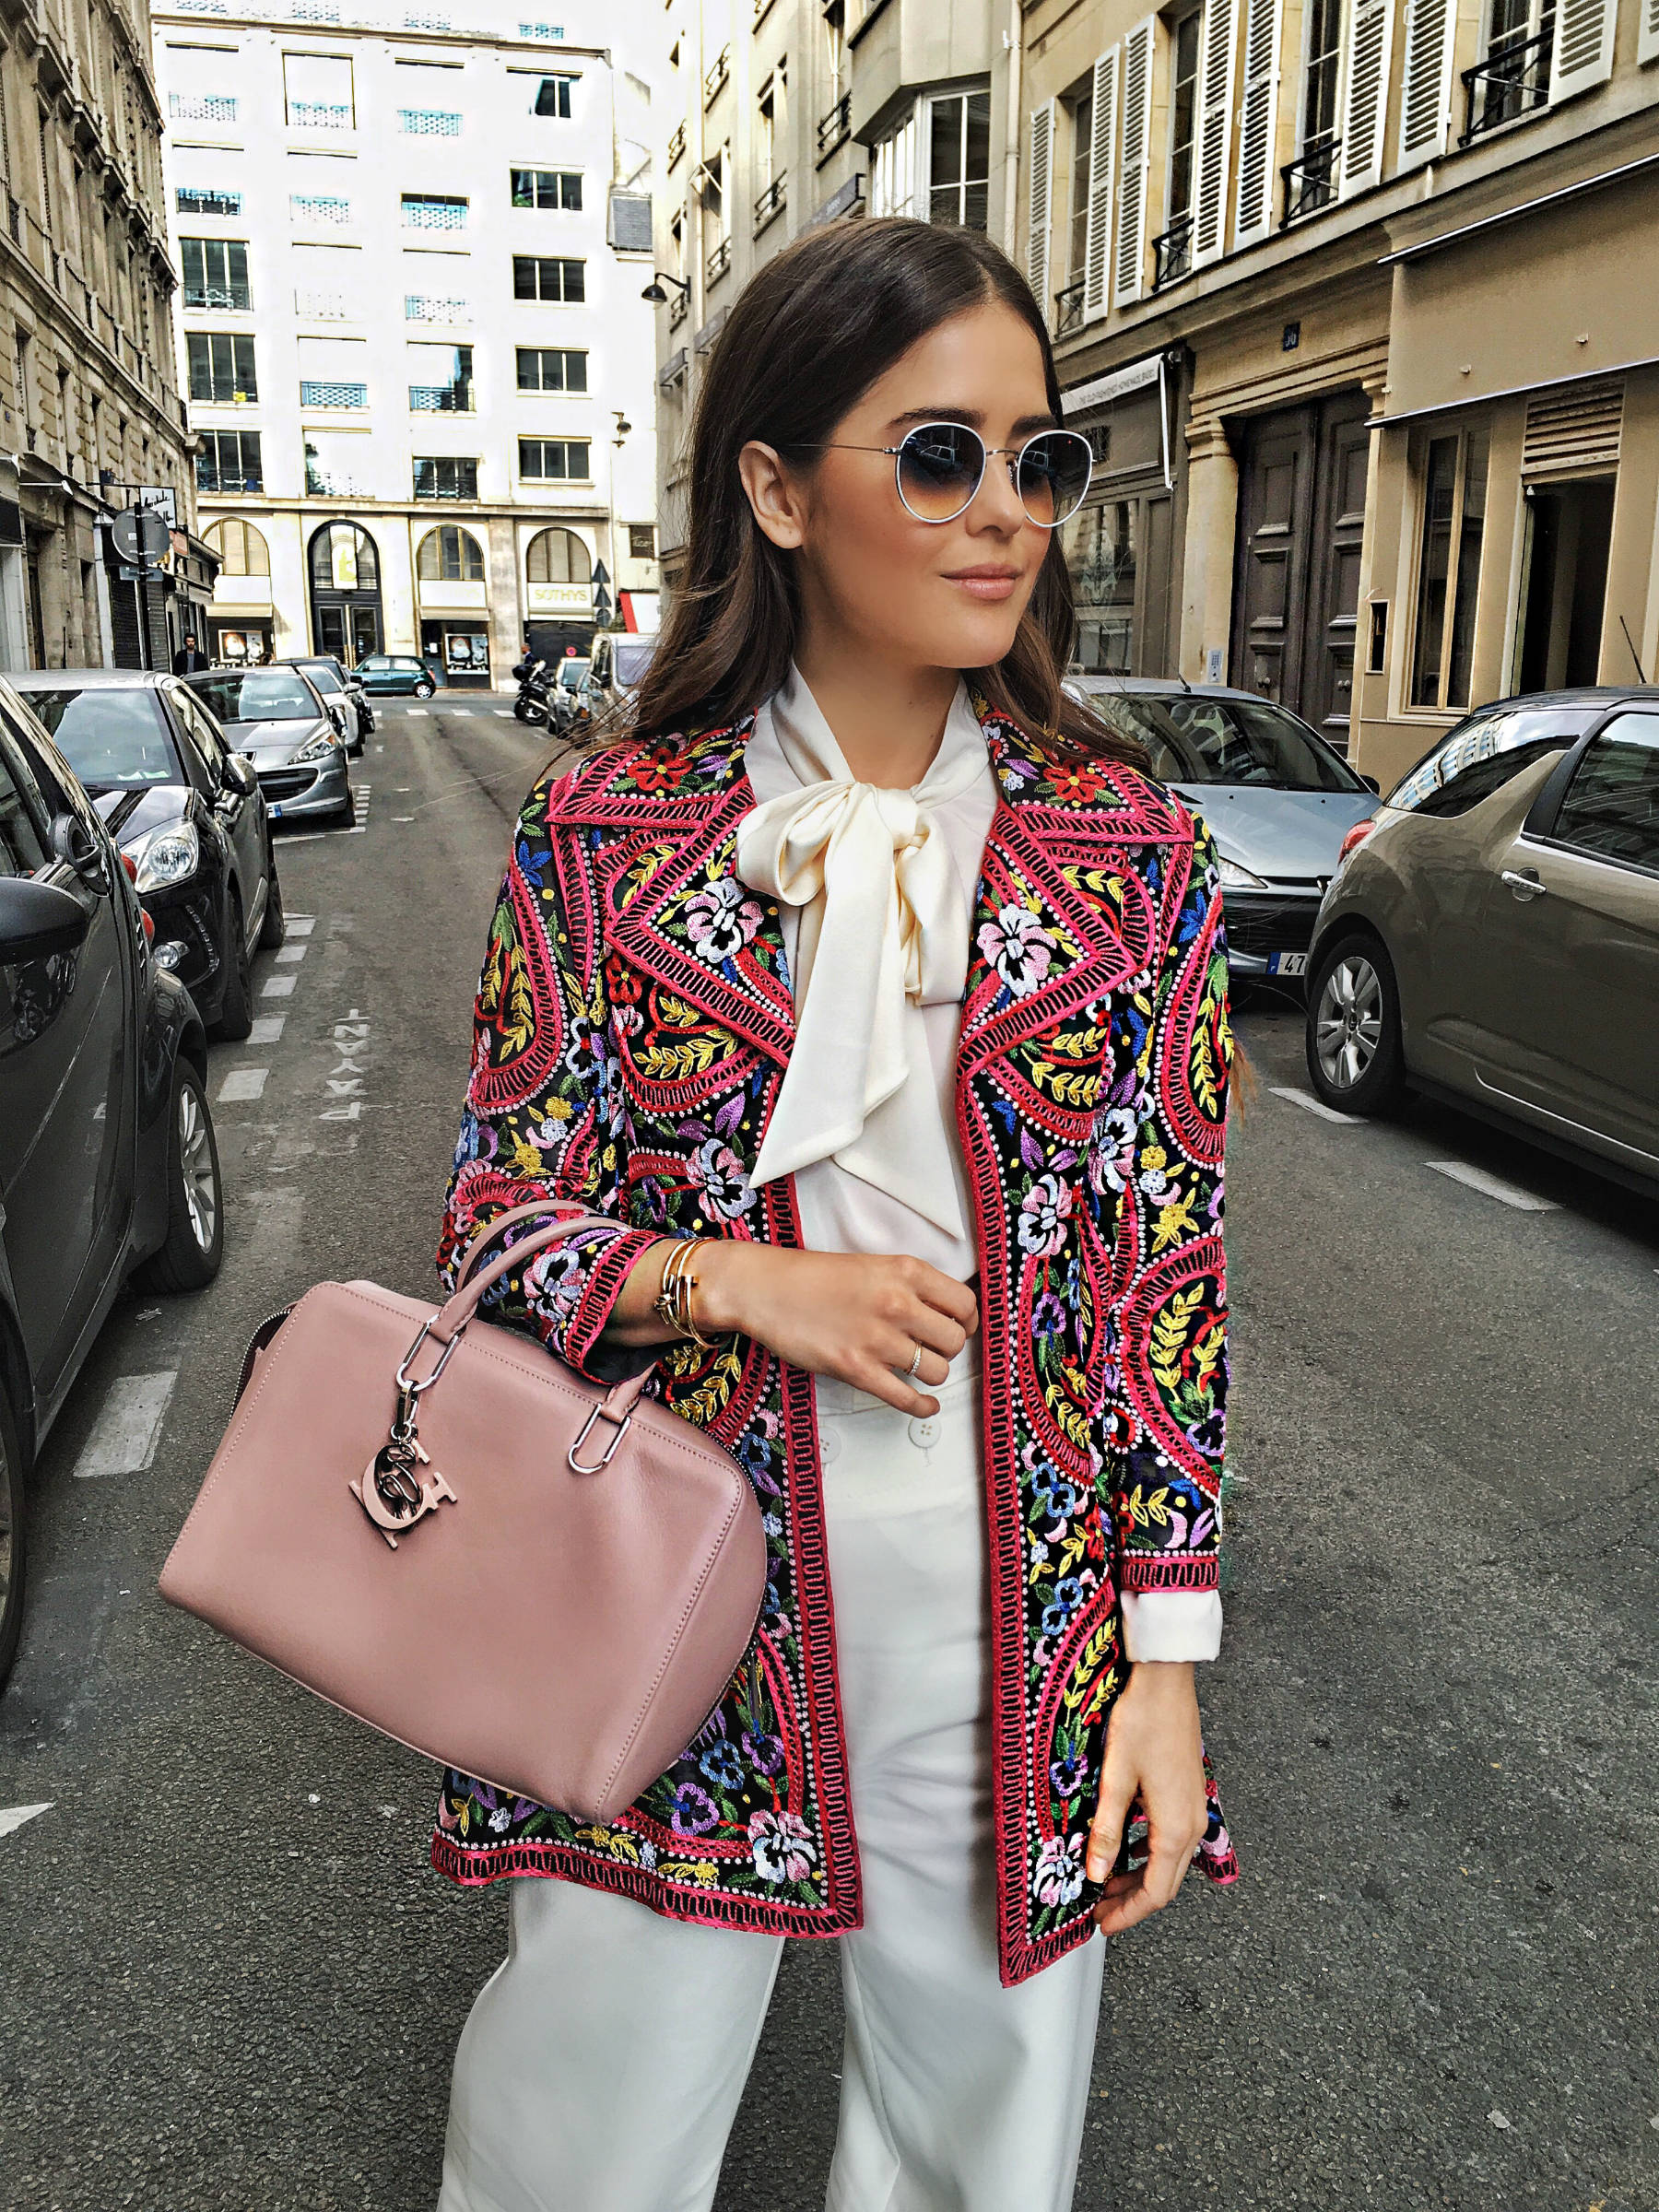 Paola Alberdi in a colorful embroidered jacket in a Parisian street.